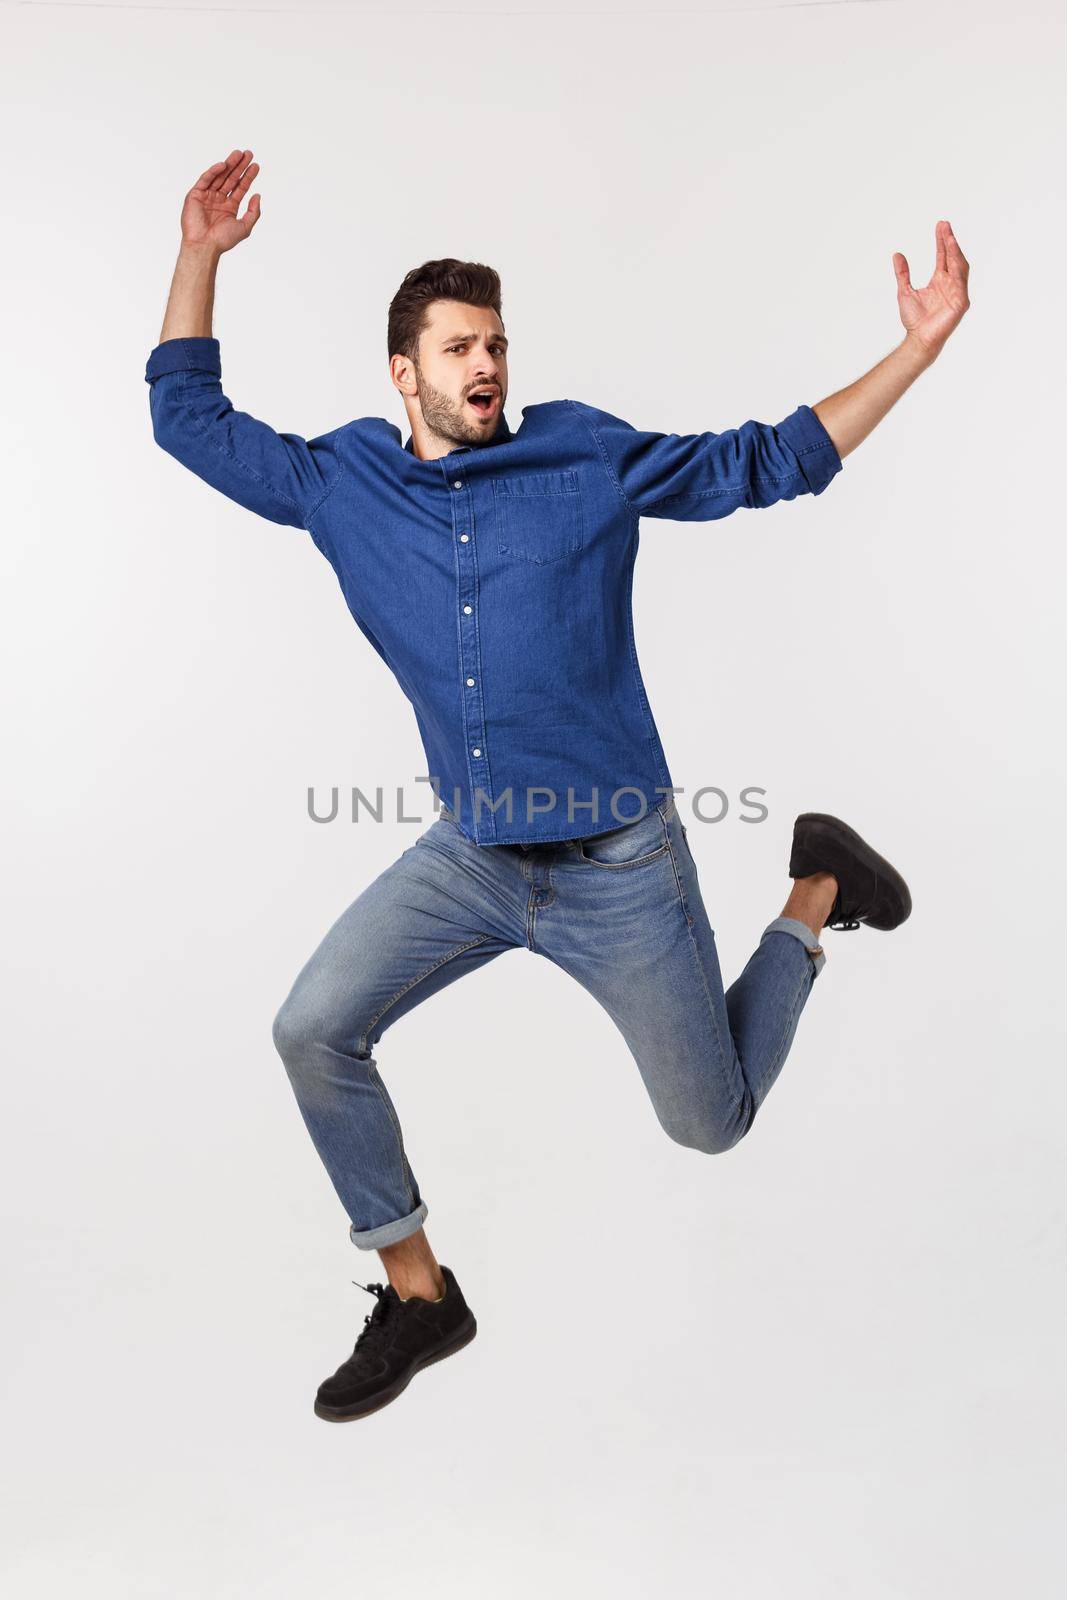 An attractive athletic businessman jumping up against white background by Benzoix